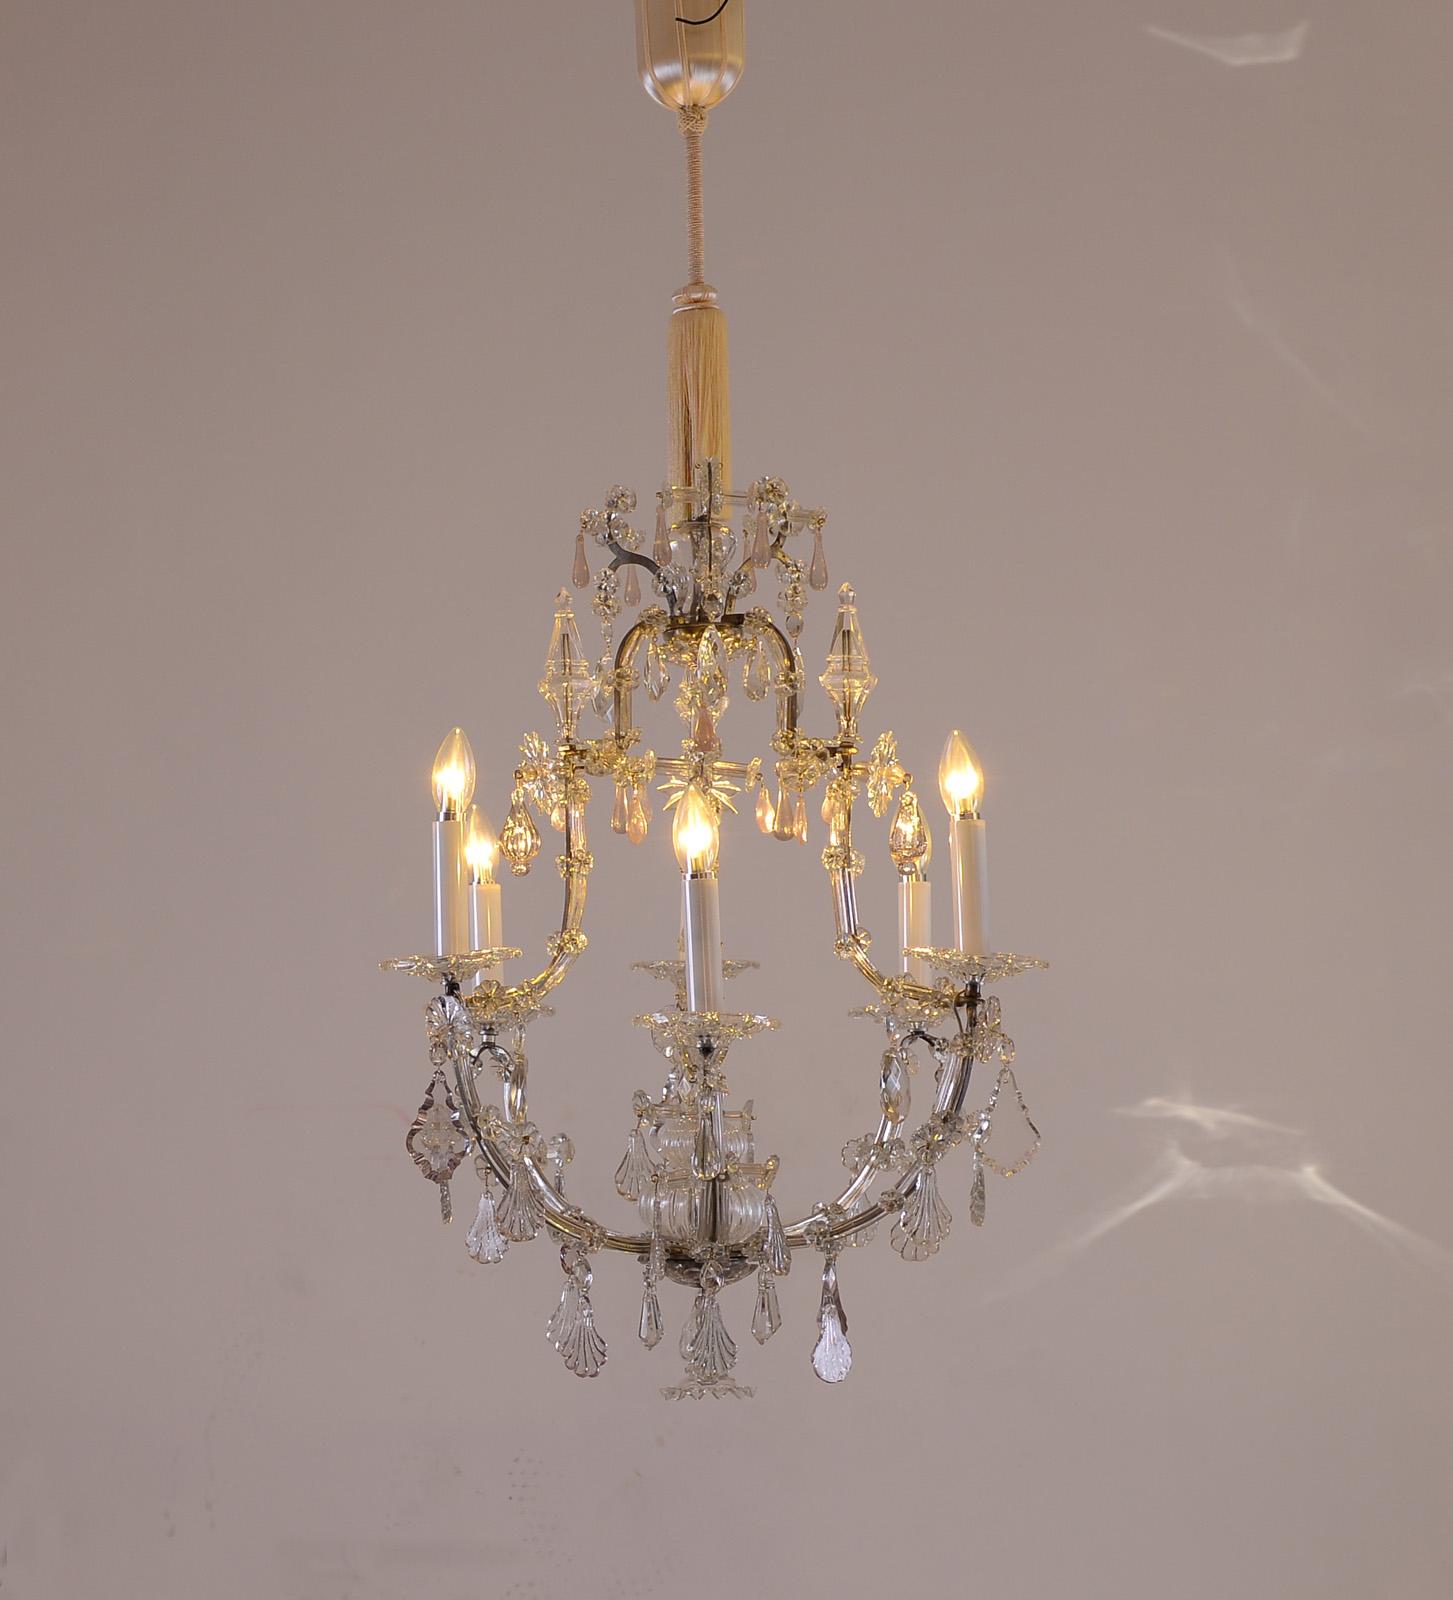 Antique Rococo chandelier, with zinn-plated iron frame, partly with rose resin-hanging - restored

Wired for the US.